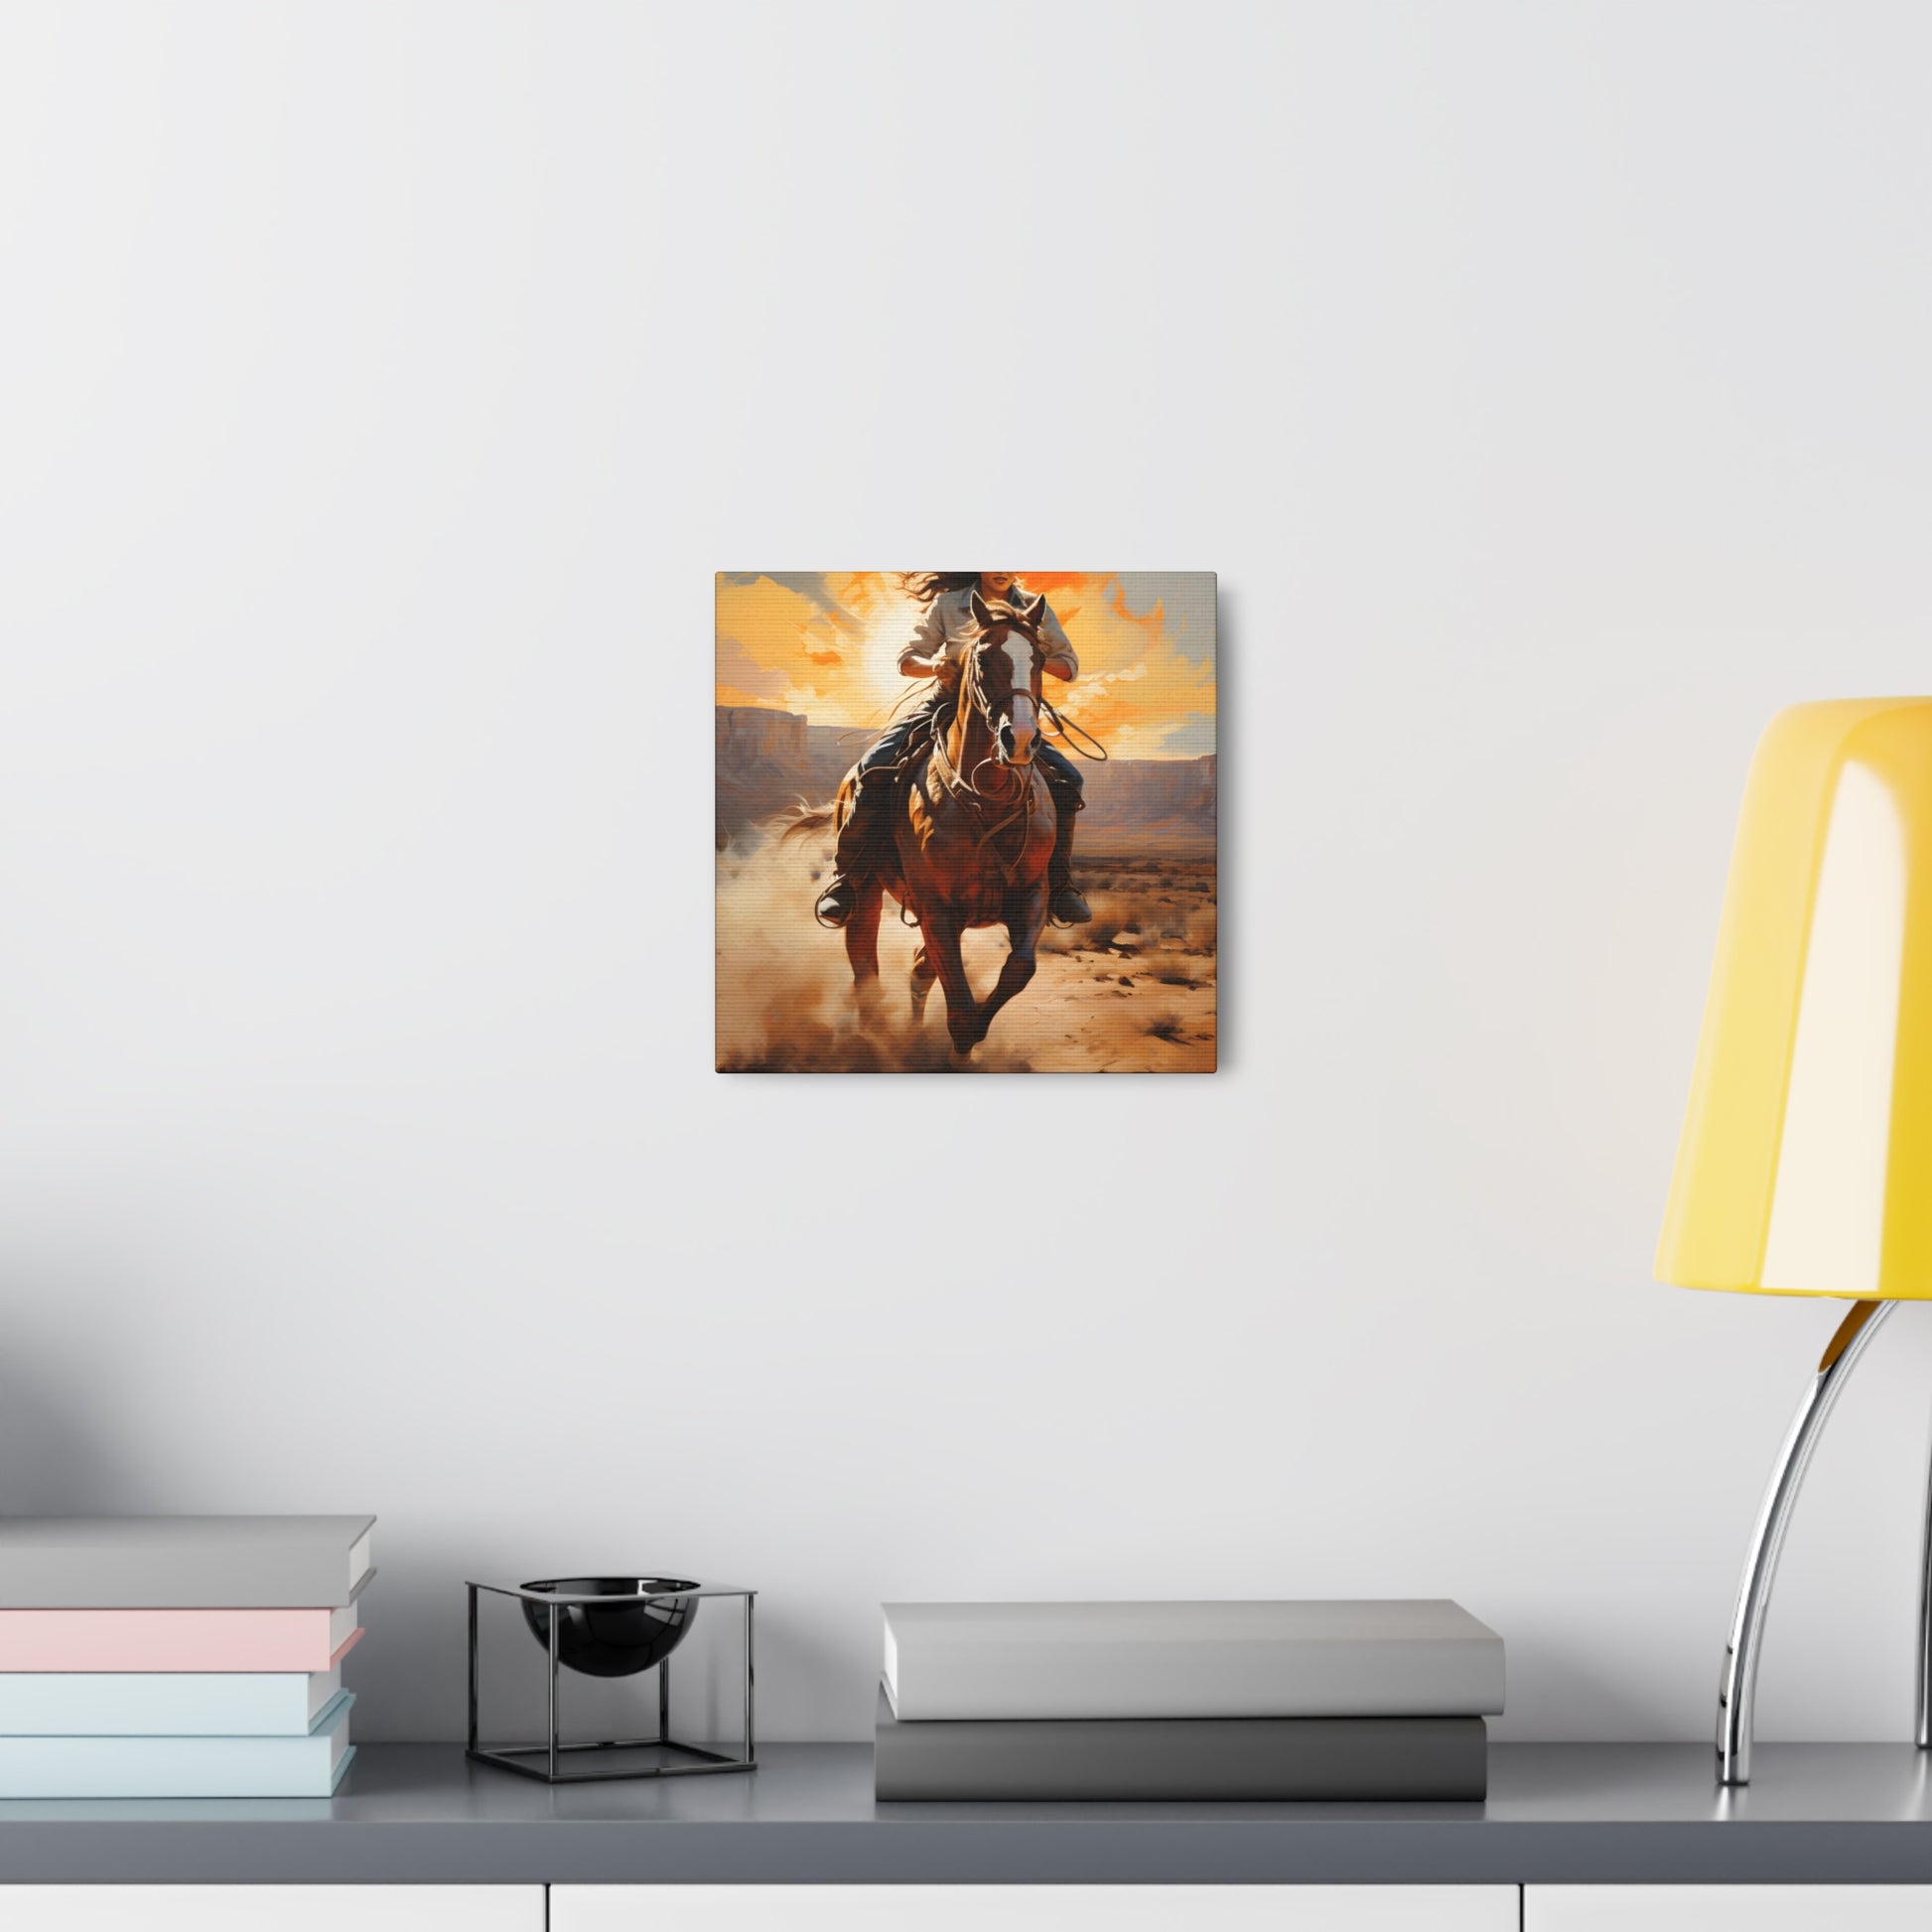 A Road Poneglyph to the One Piece Canvas Print for Sale by